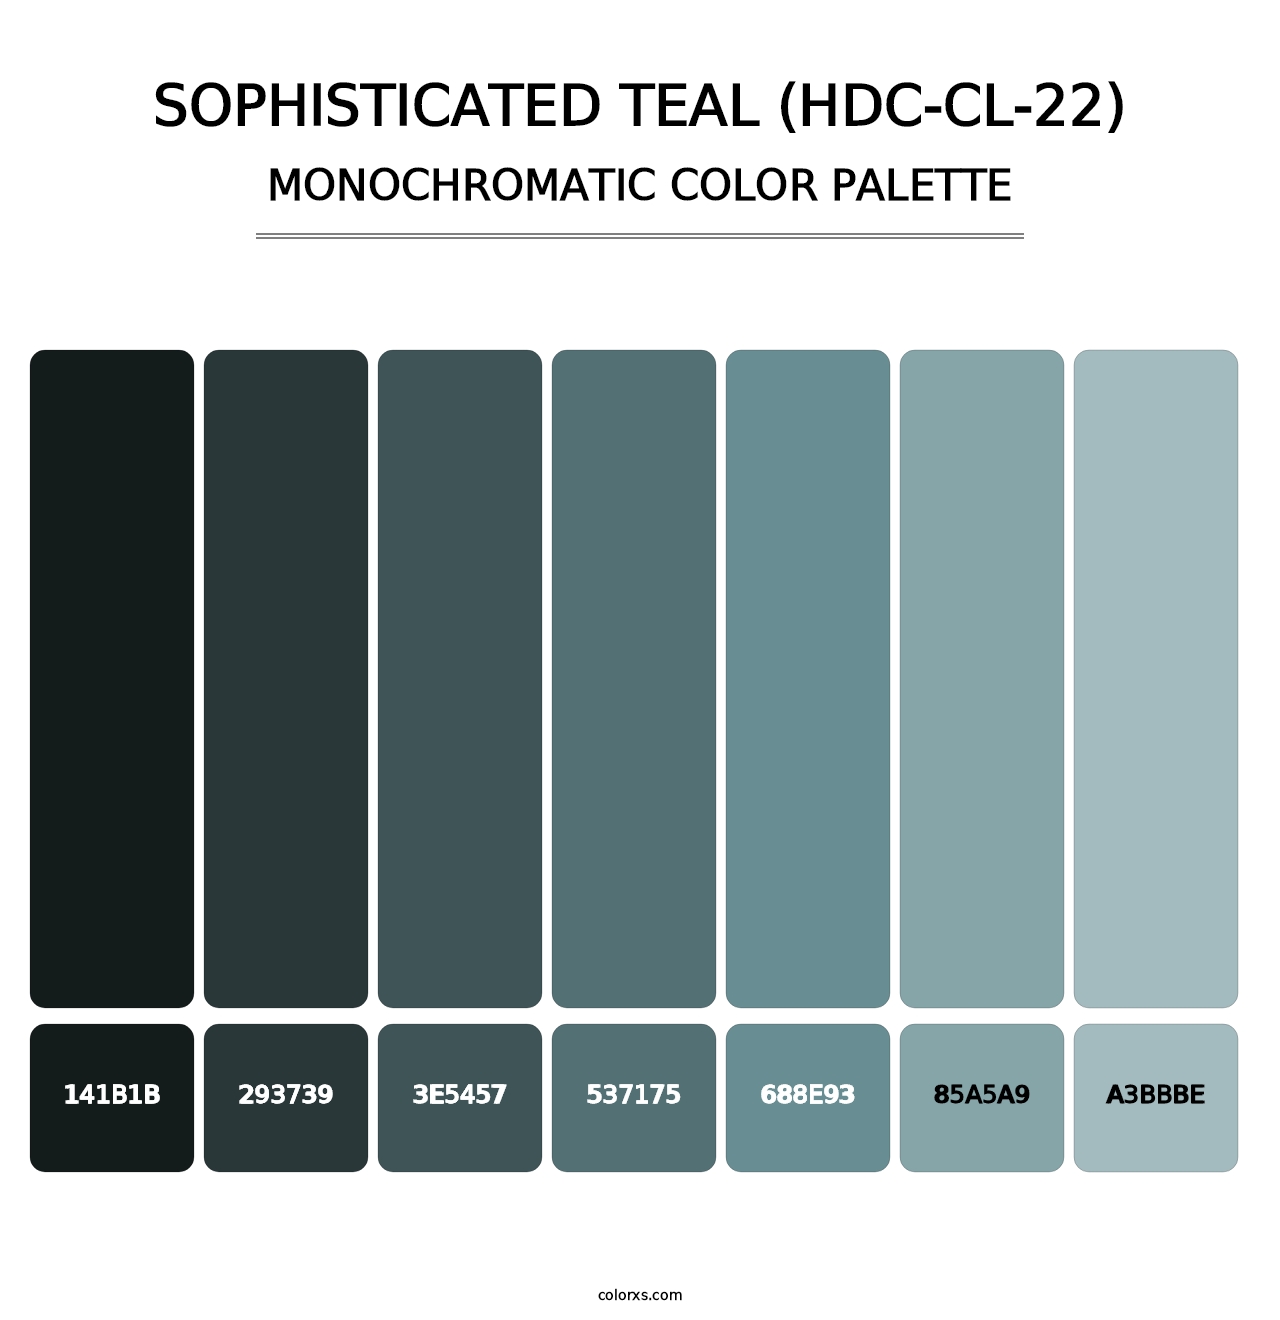 Sophisticated Teal (HDC-CL-22) - Monochromatic Color Palette